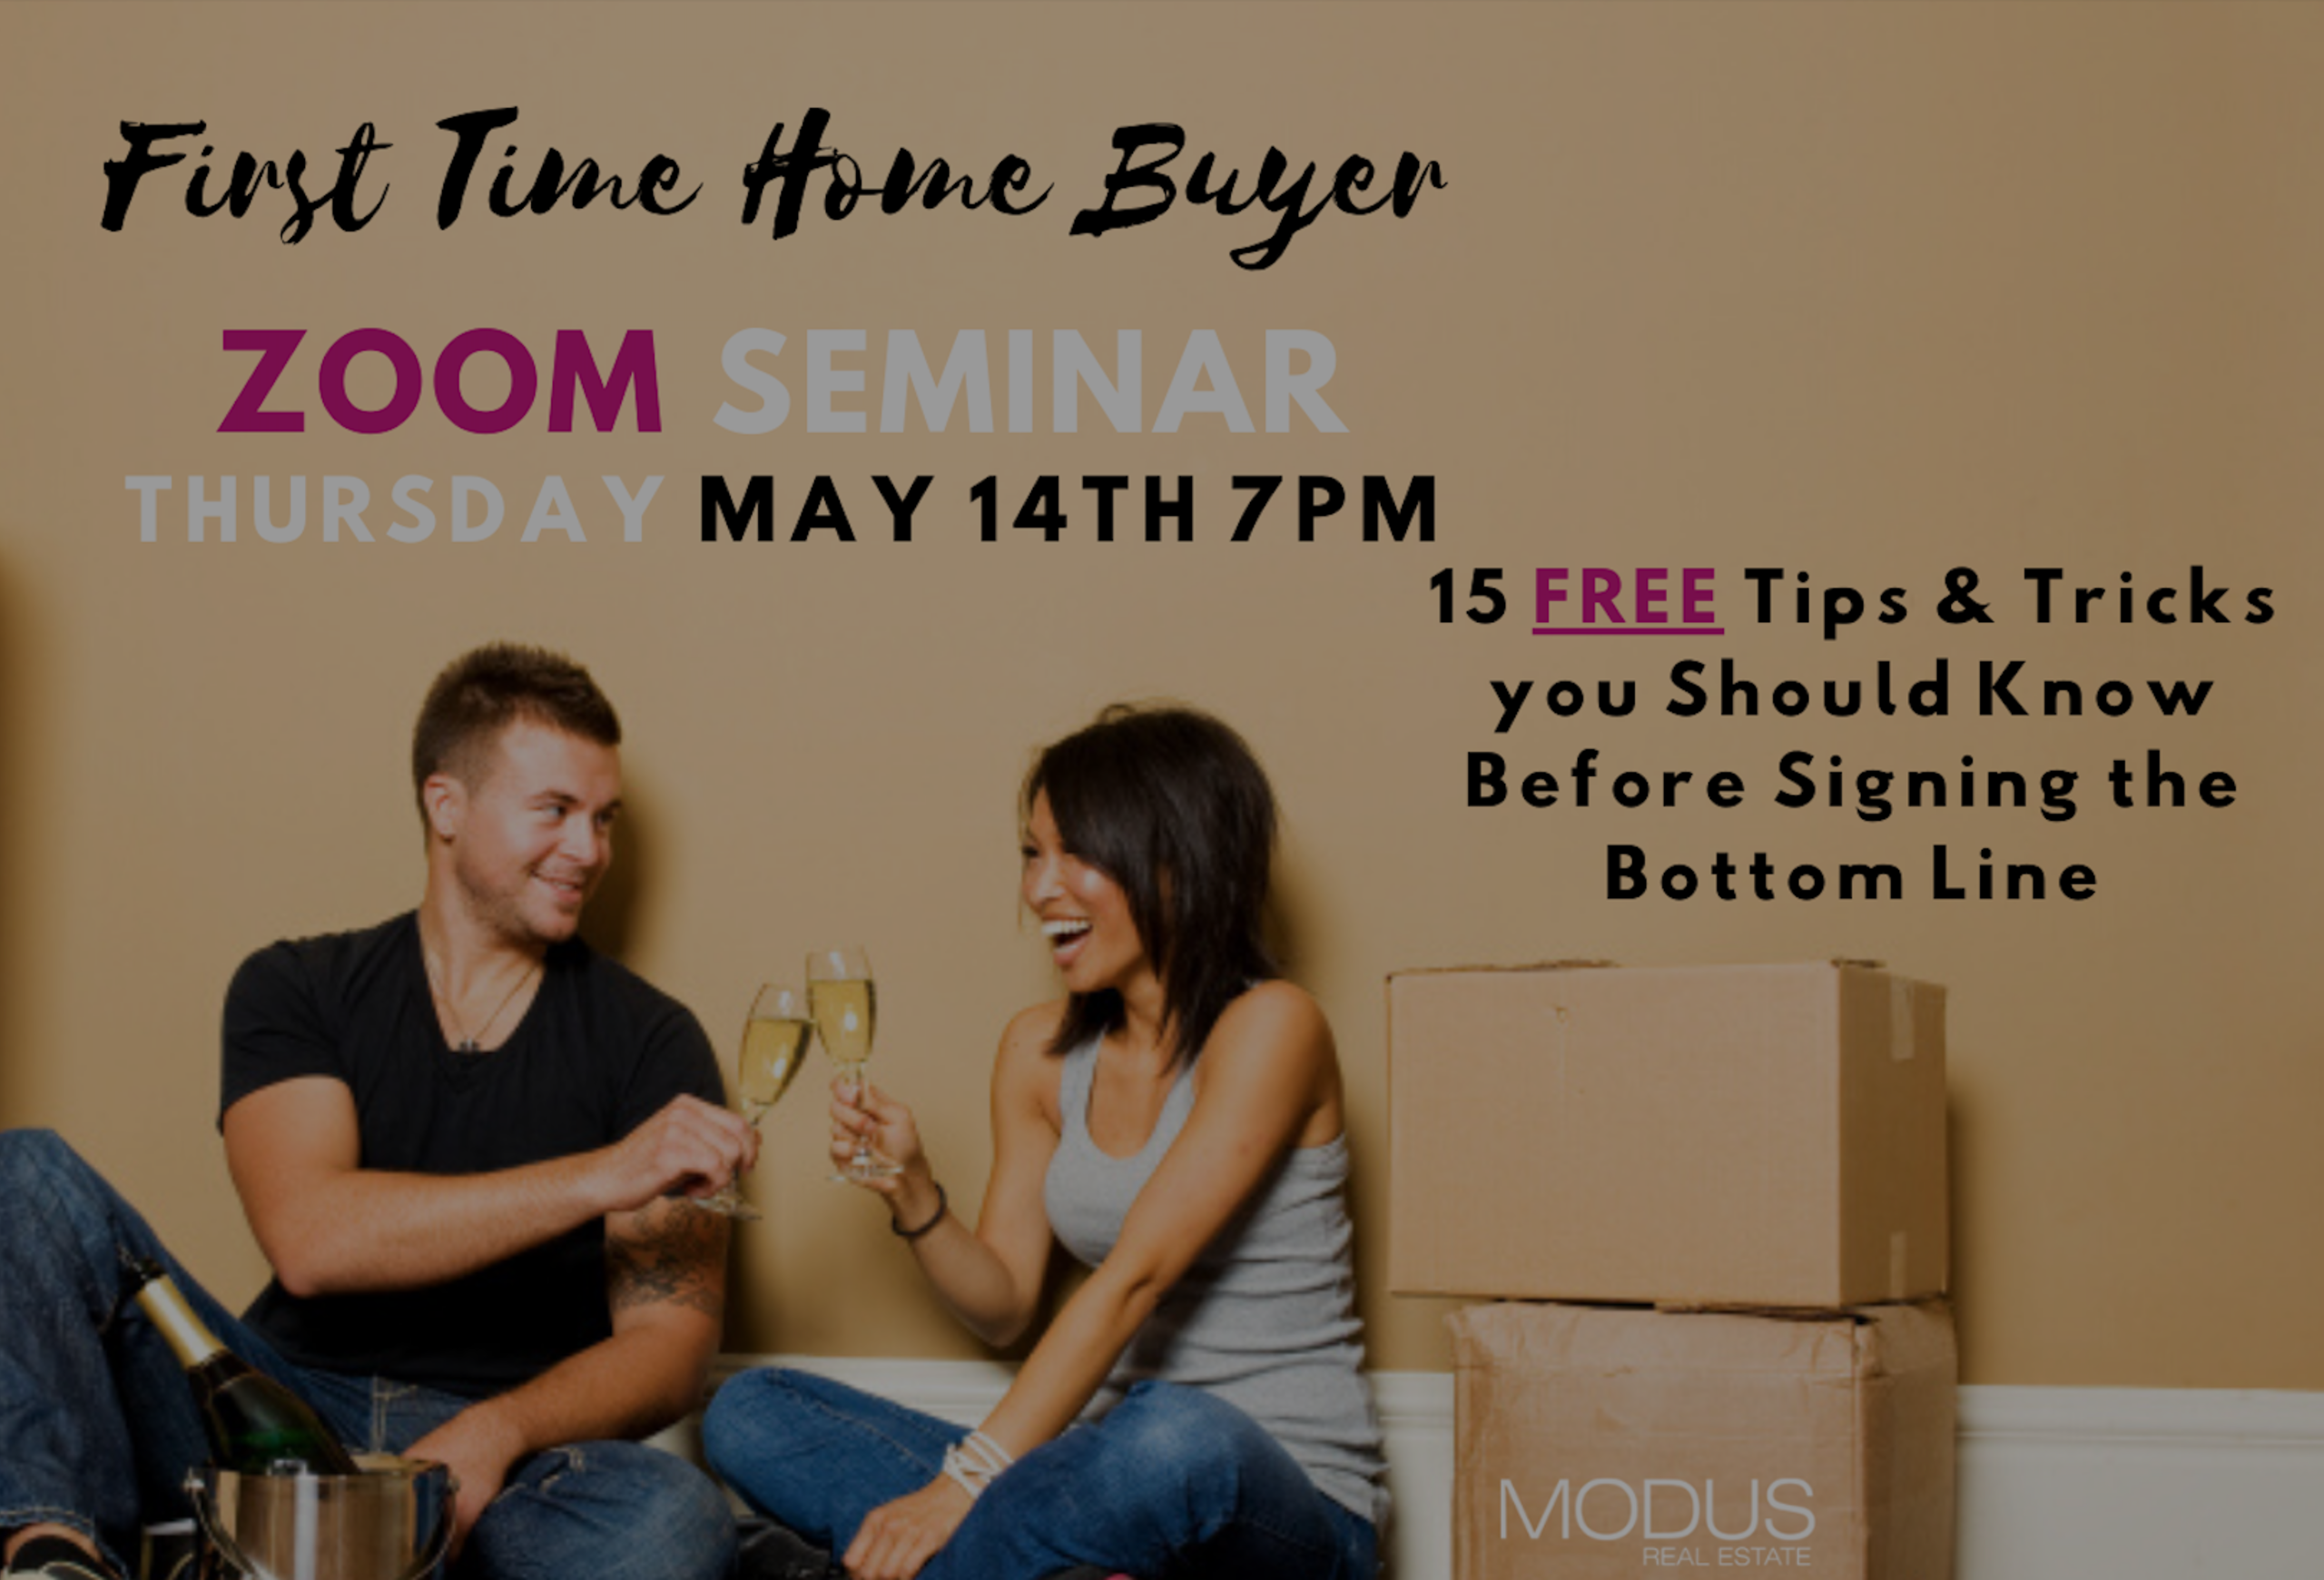 First Time Home Buyer Zoom Seminar